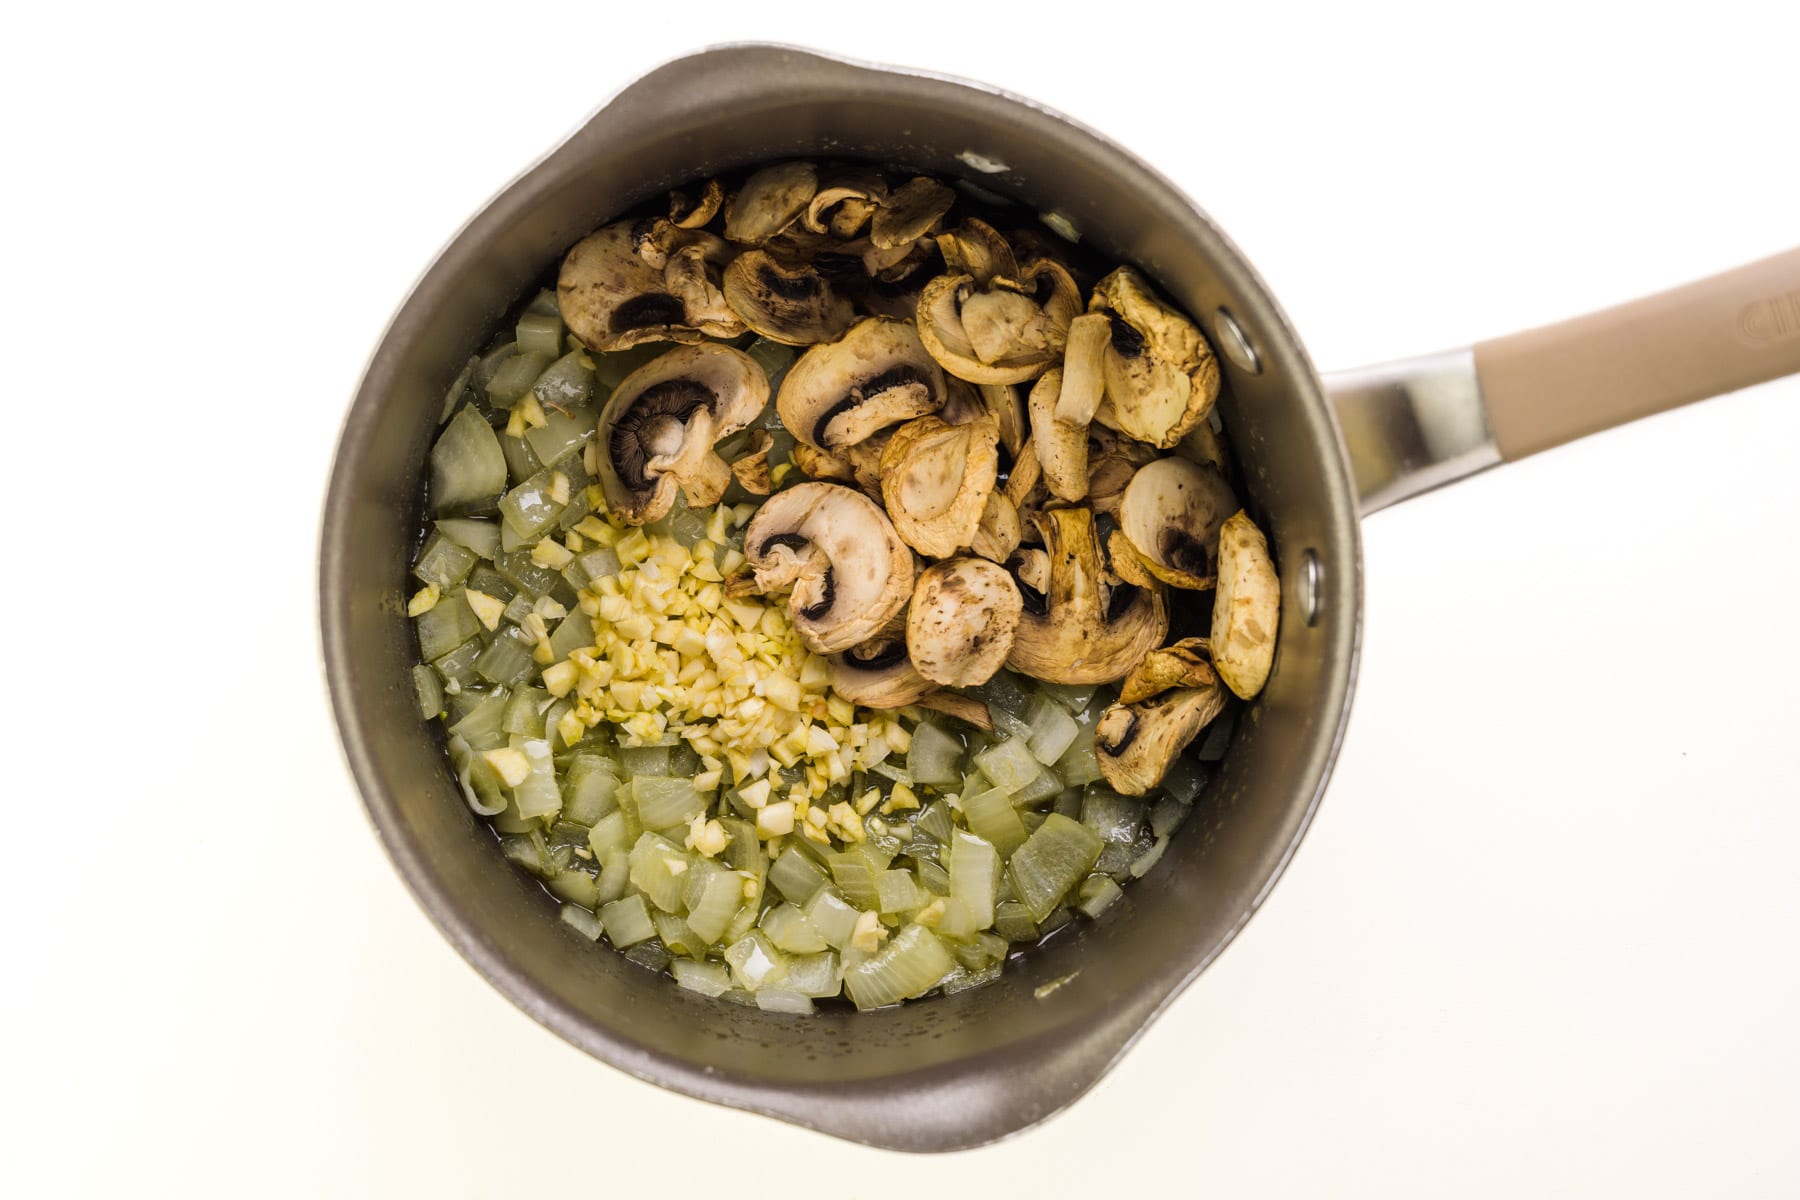 Mushrooms and chopped garlic are in a saucepan with cooked onions.